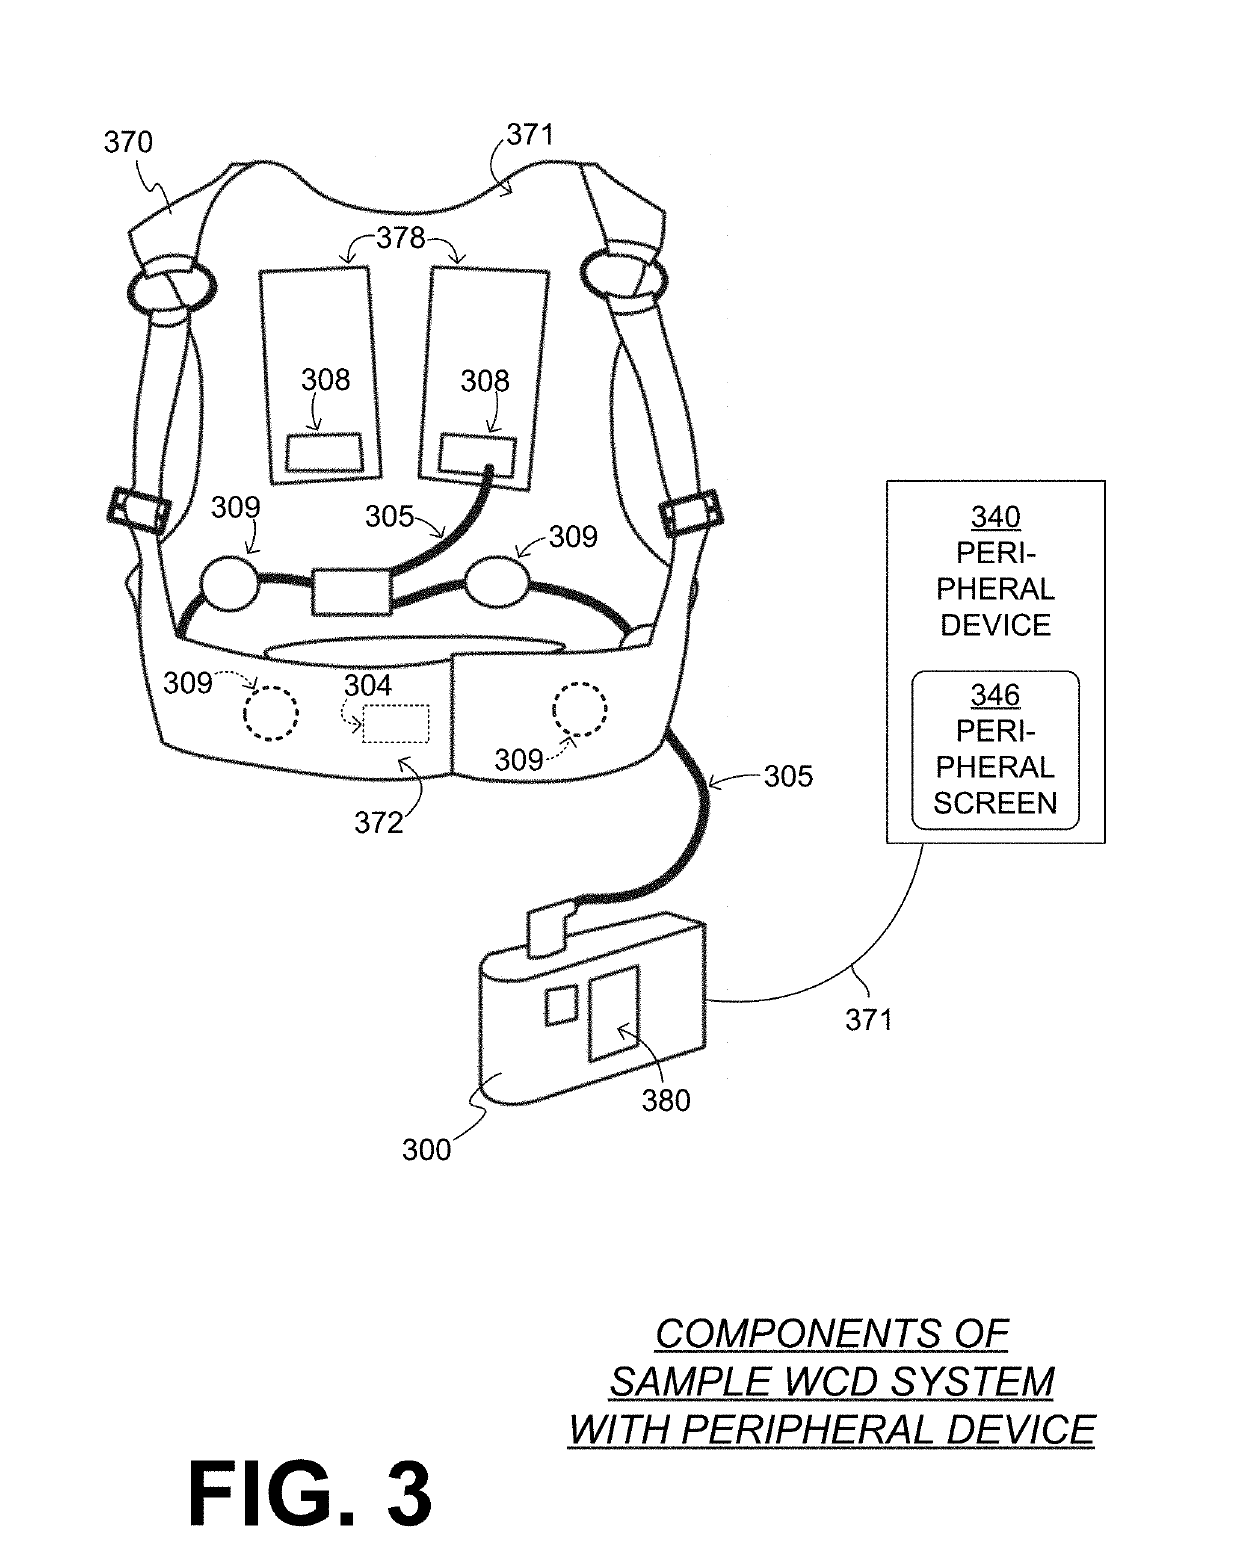 Wearable cardioverter defibrillator (WCD) system having main ui that conveys message and peripheral device that amplifies the message